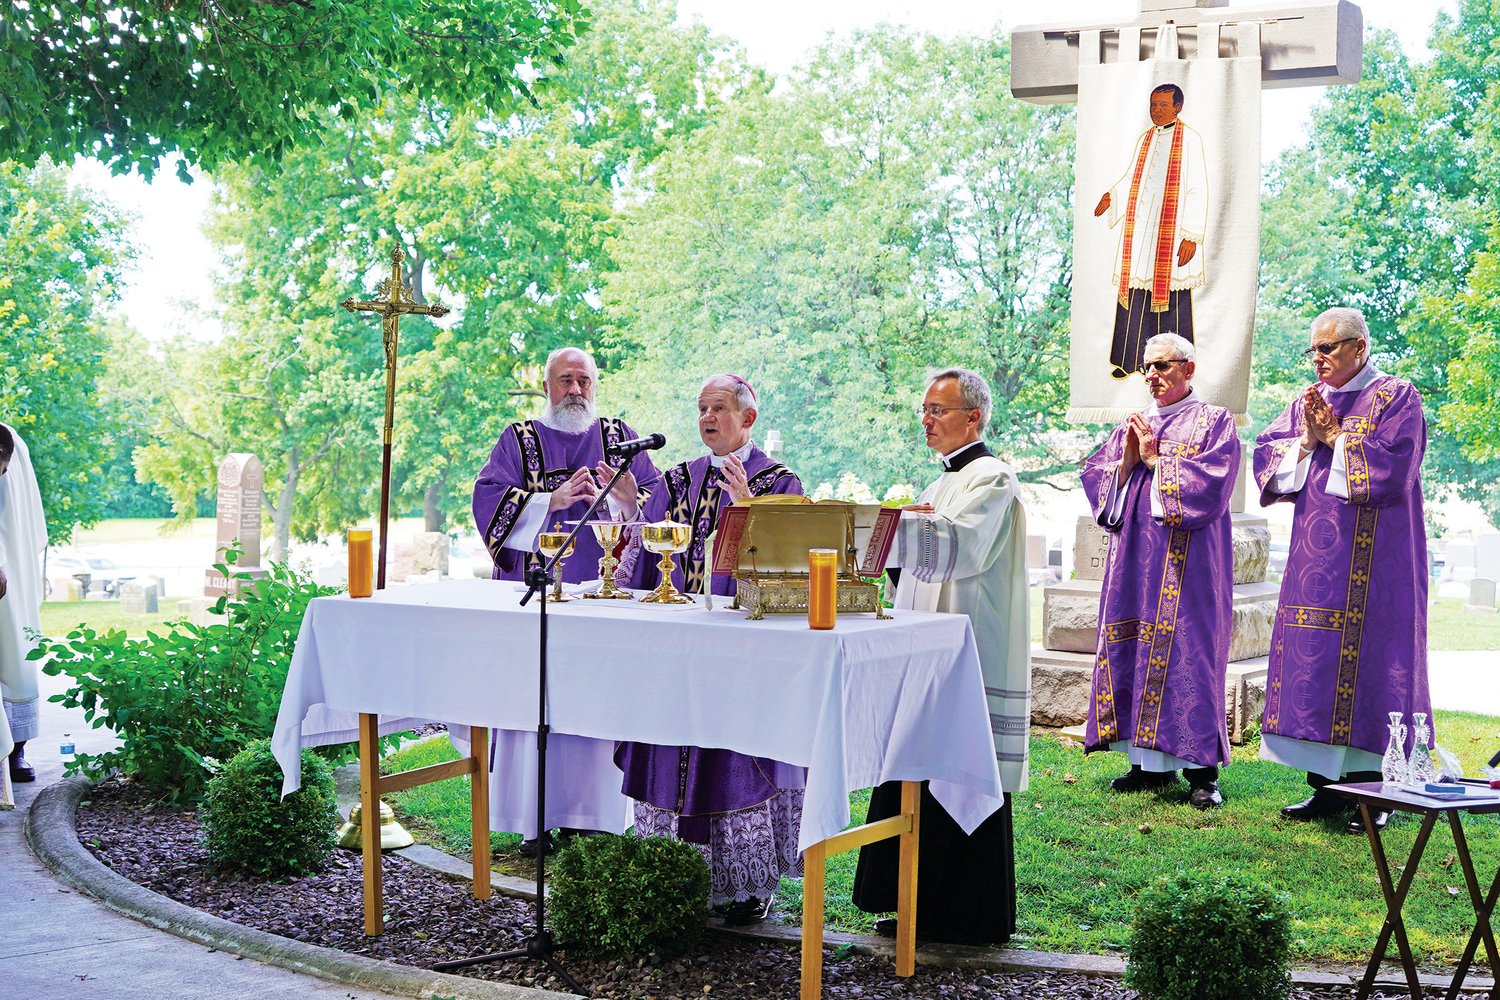 Bishop Thomas J. Paprocki of Springfield, Illinois, offers Mass at the burial place of Venerable Father Augustus Tolton in St. Peter Cemetery in Quincy, Illinois, on July 9, the 125th anniversary of Fr. Tolton’s death. Fr. Tolton, the Roman Catholic Church’s first recognizably Black priest, was born into a family of enslaved people and baptized in St. Peter Church in Brush Creek in what is now part of the Jefferson City diocese. He escaped with his family to Illinois during the Civil War. He is under serious consideration for being declared a Saint.